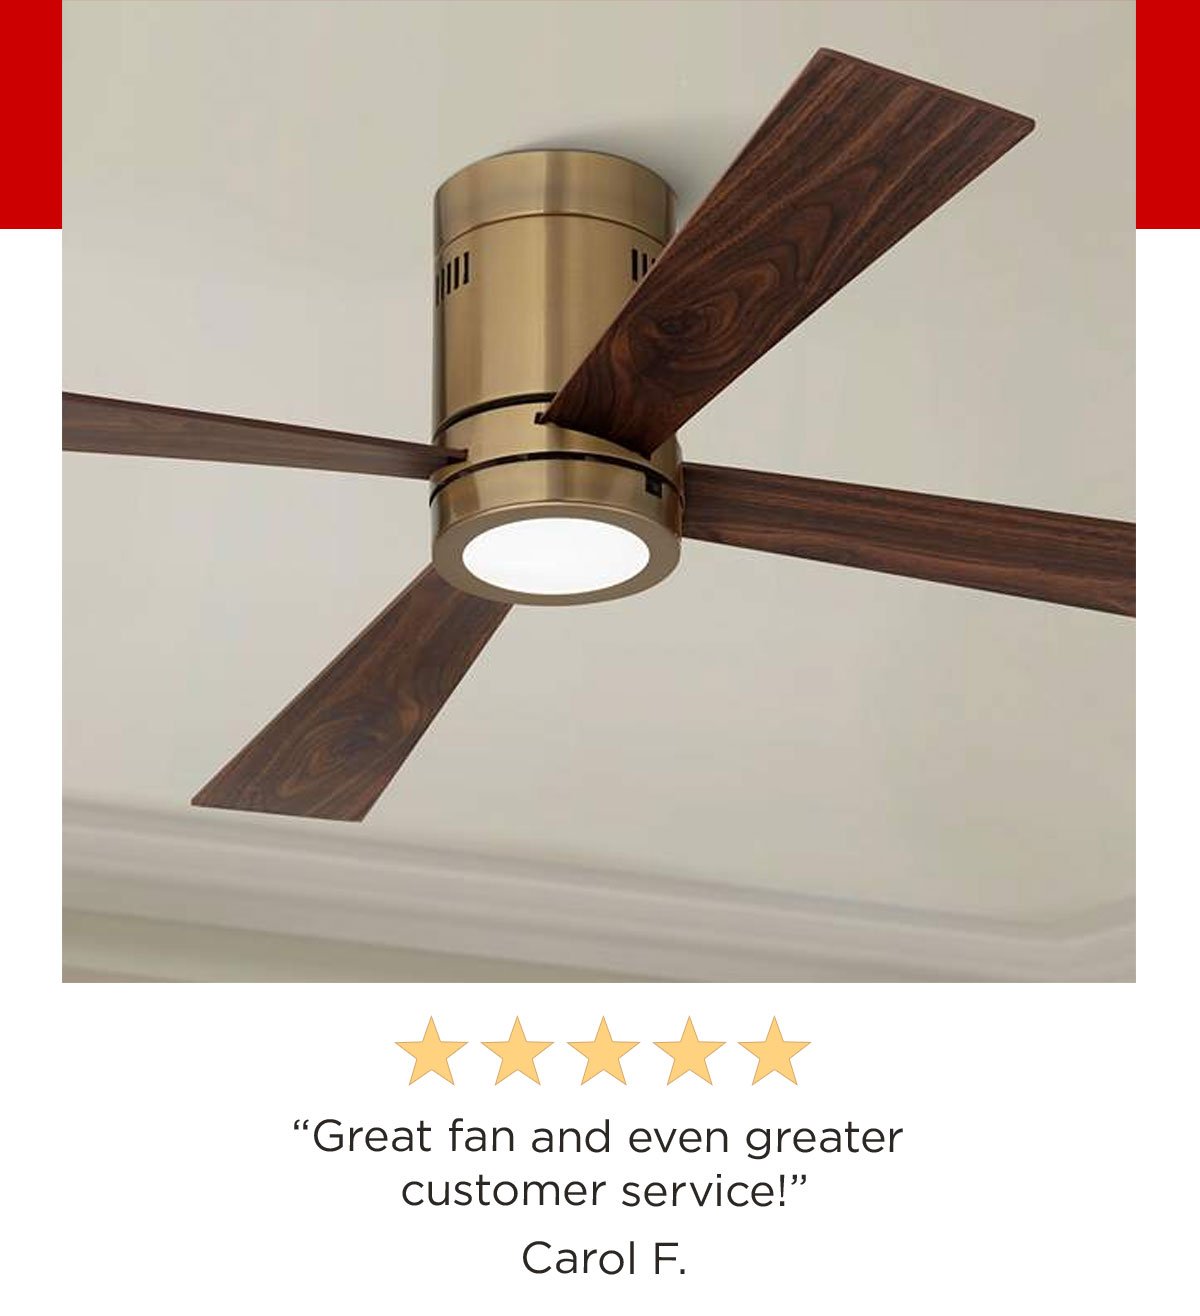 5 stars - "Great fan and even greater customer service!" Carol F.